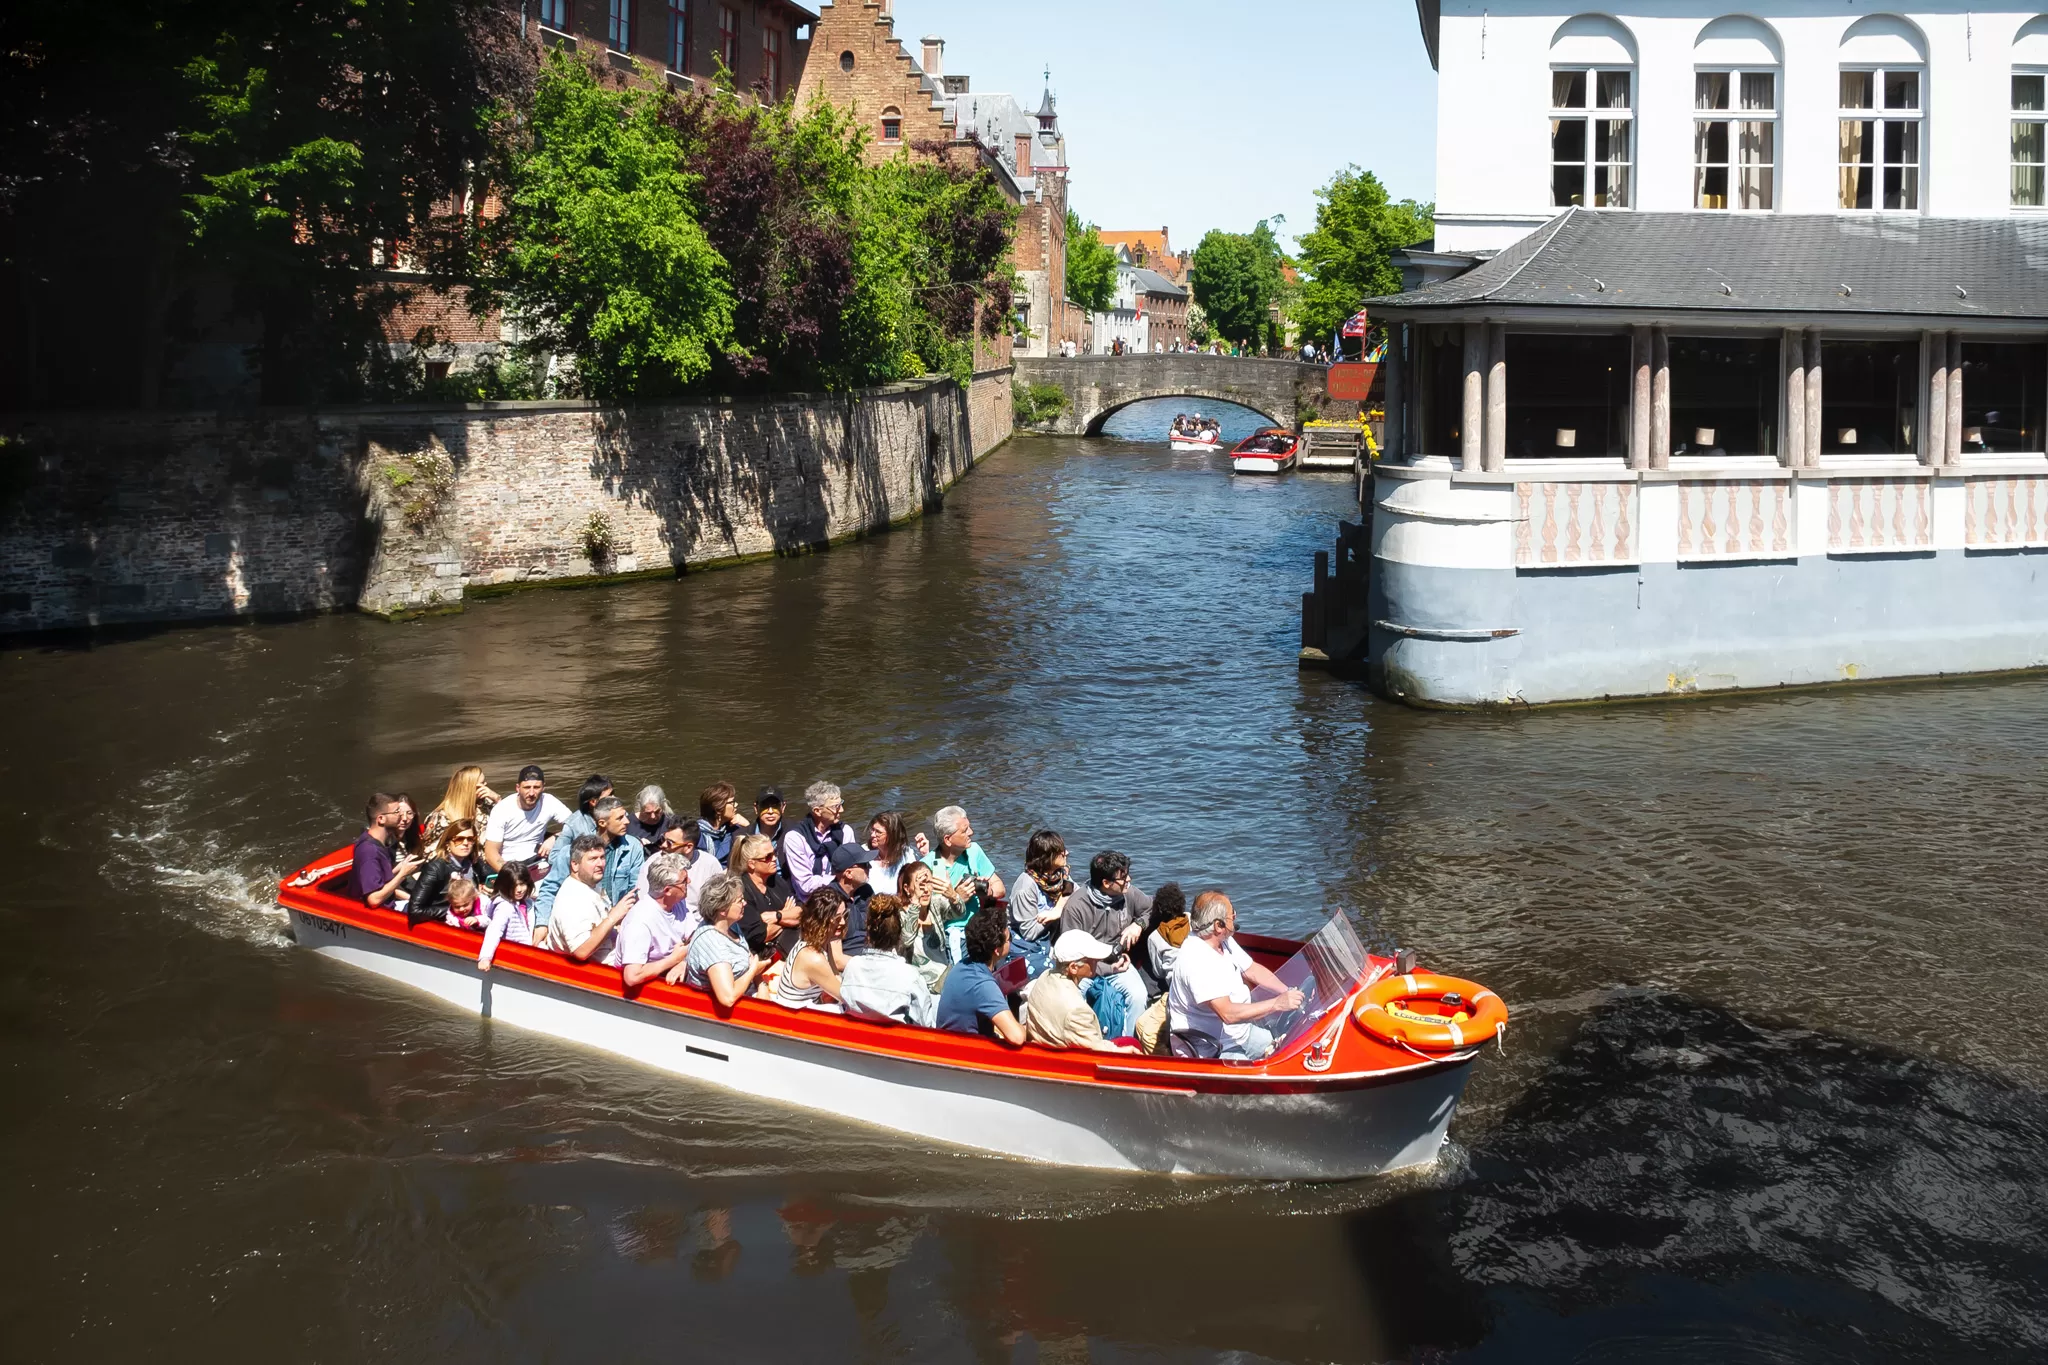 A full canal tour boat ride in the water in Brugges Belgium